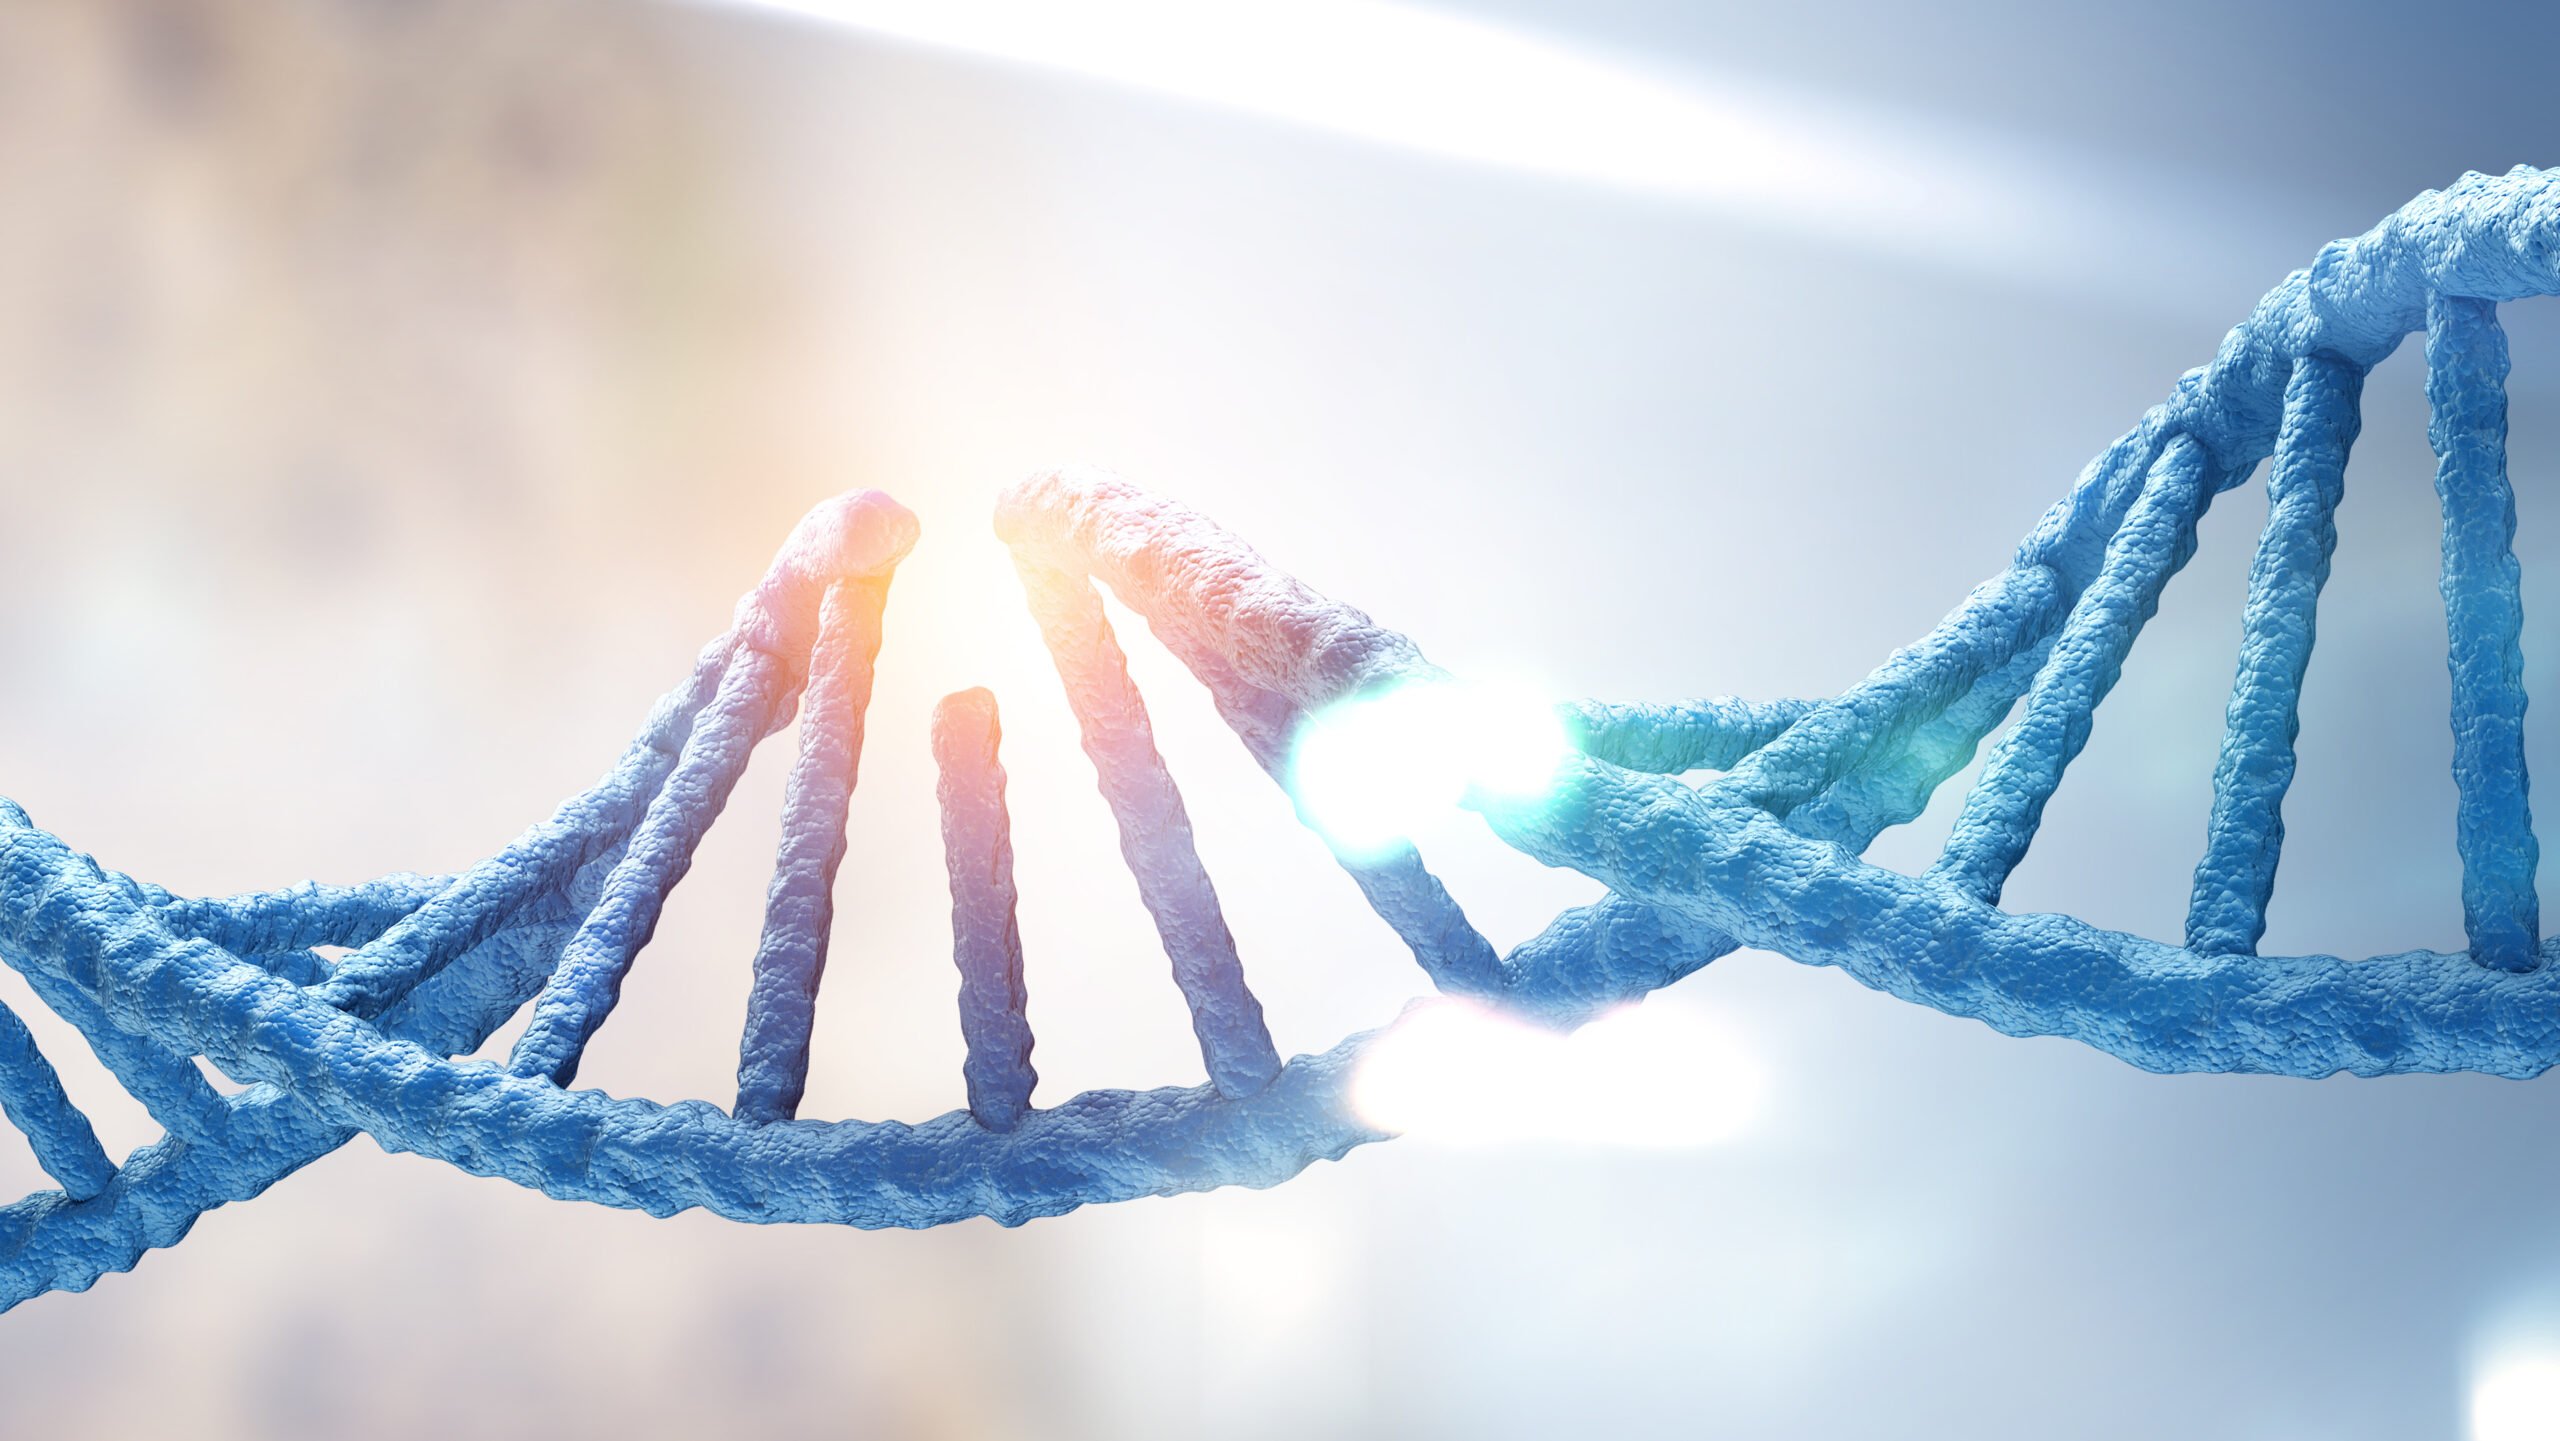 New research shows loss of epigenetic information can drive aging